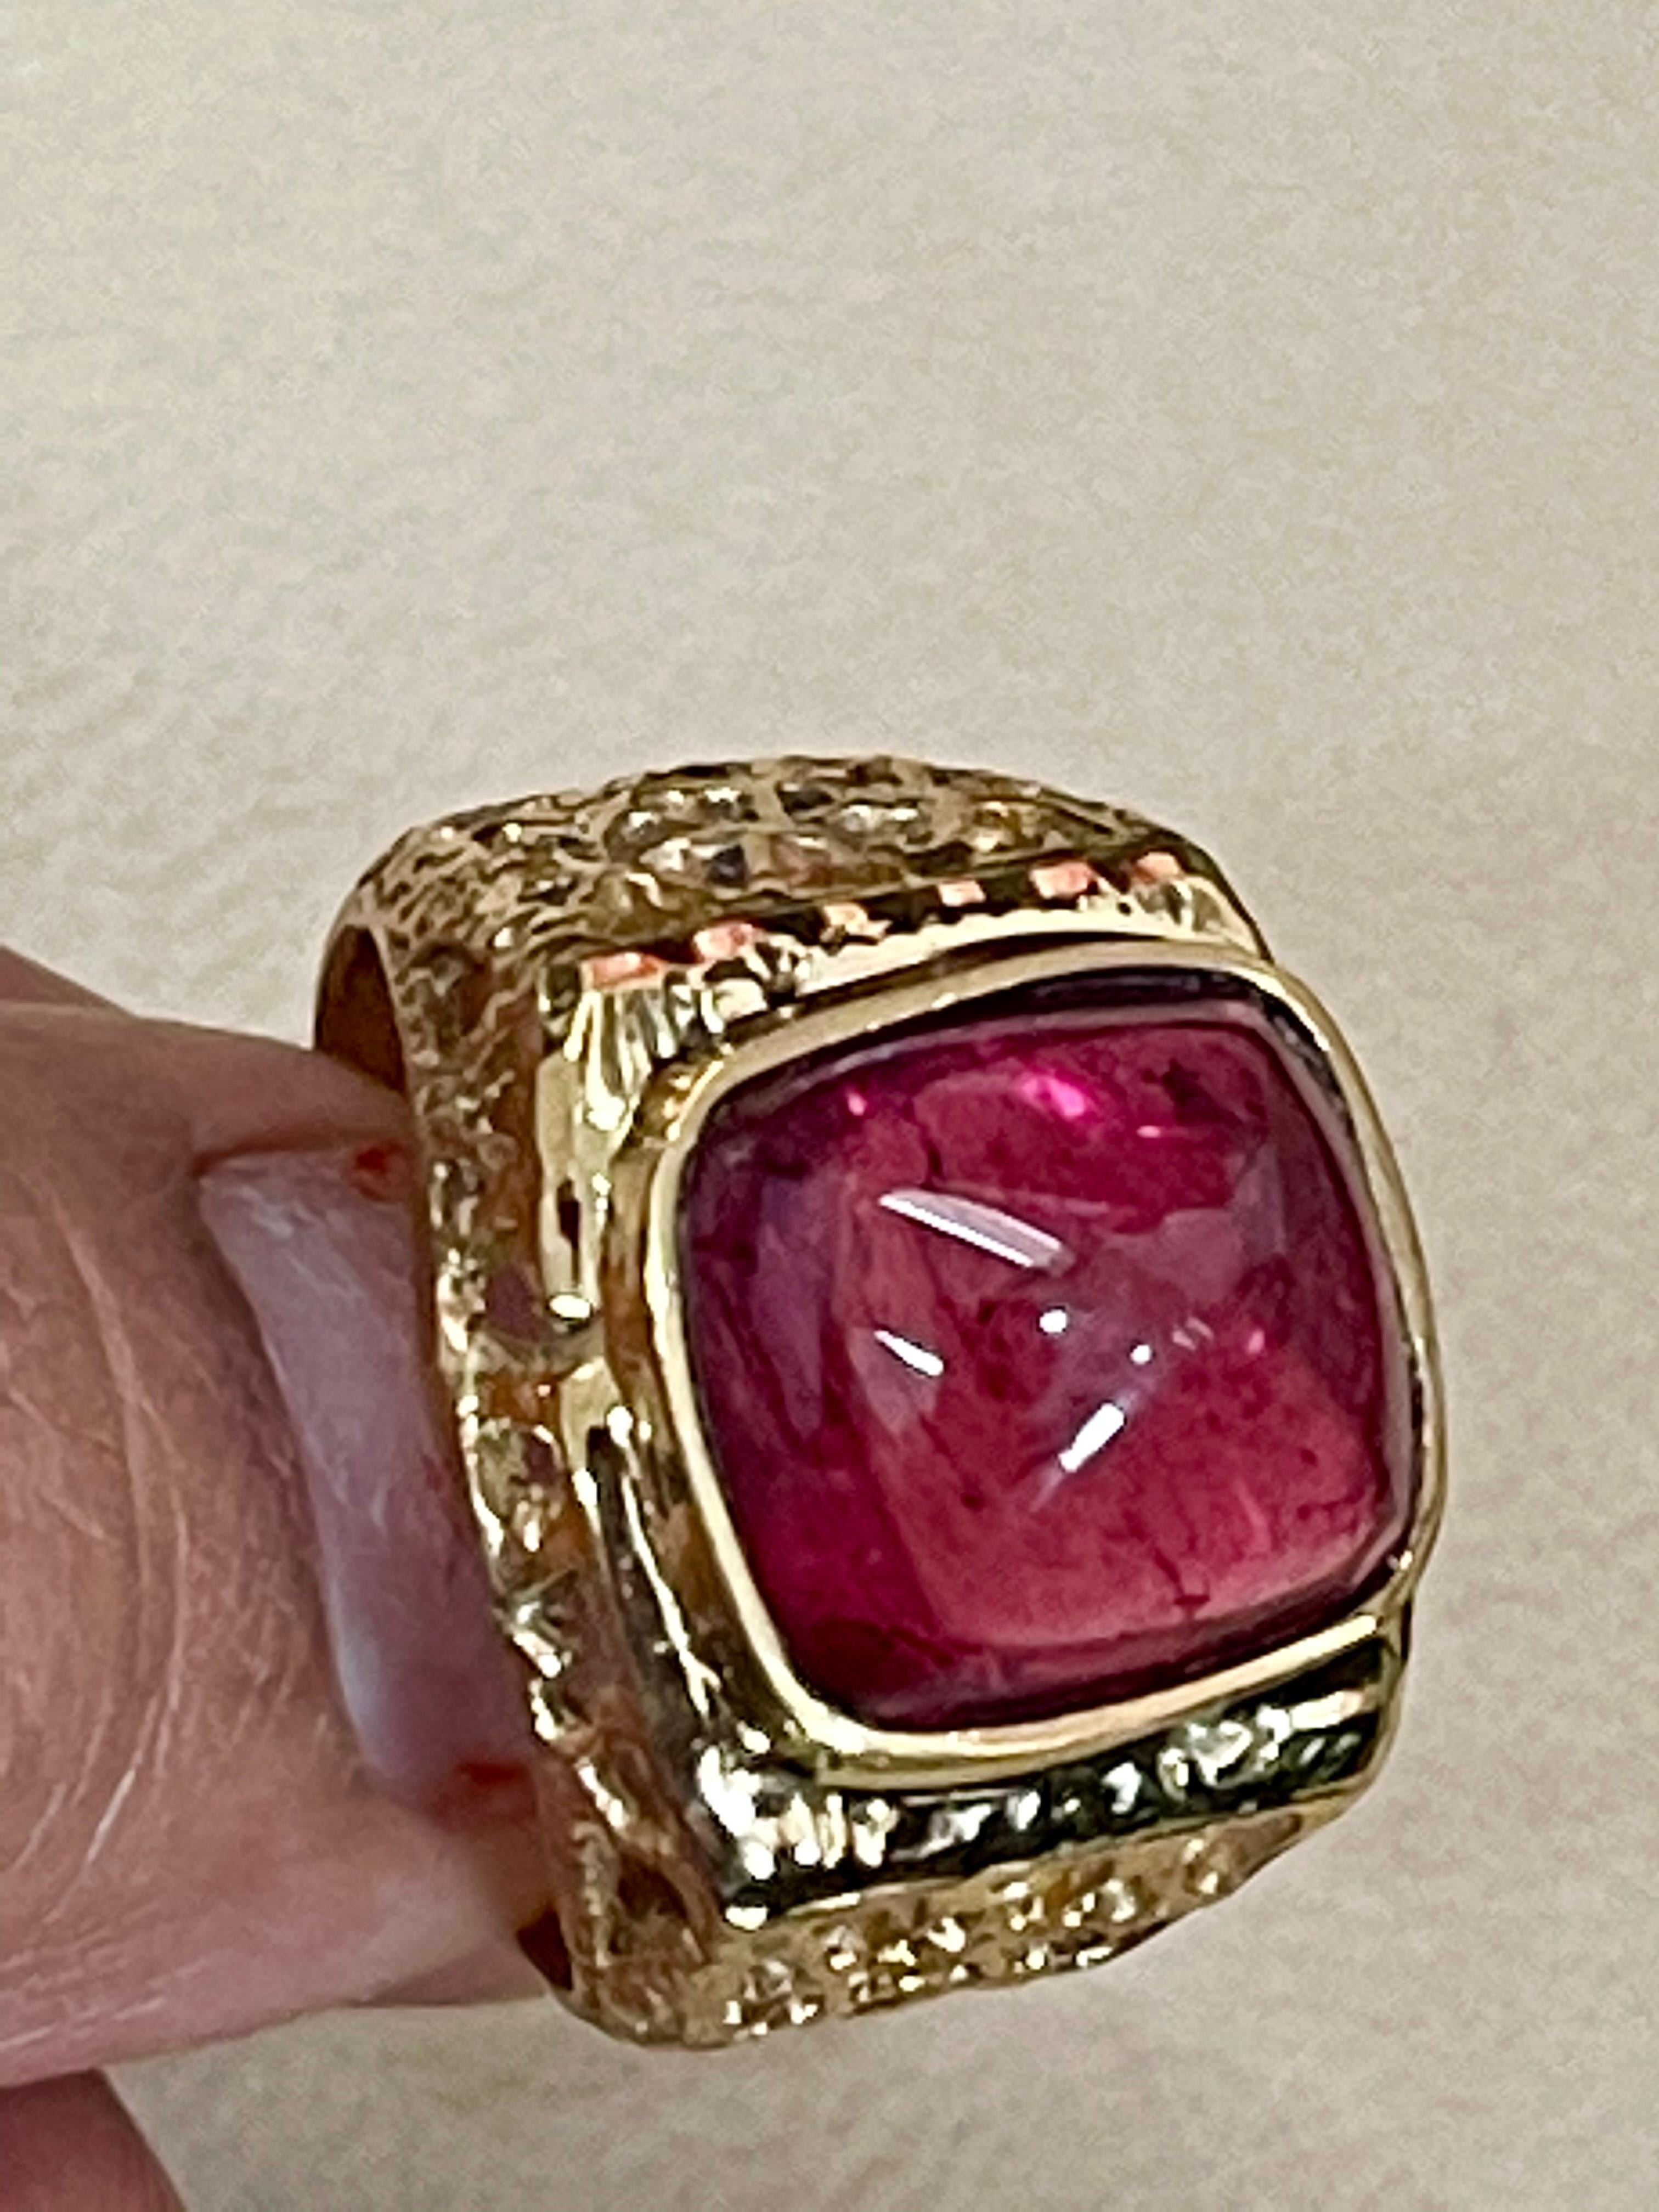 Approximately 8 Carat Oval Cut Sugar Loaf Cabochon Pink Tourmaline 14 Karat Yellow Gold Ring 
Men's Ring
8 Carat of Pink Tourmaline oval shape Sugar loaf cabochon surrounded by nice gold design.
Gold: 14 Karat Yellow  gold , Beautiful design
Weight: